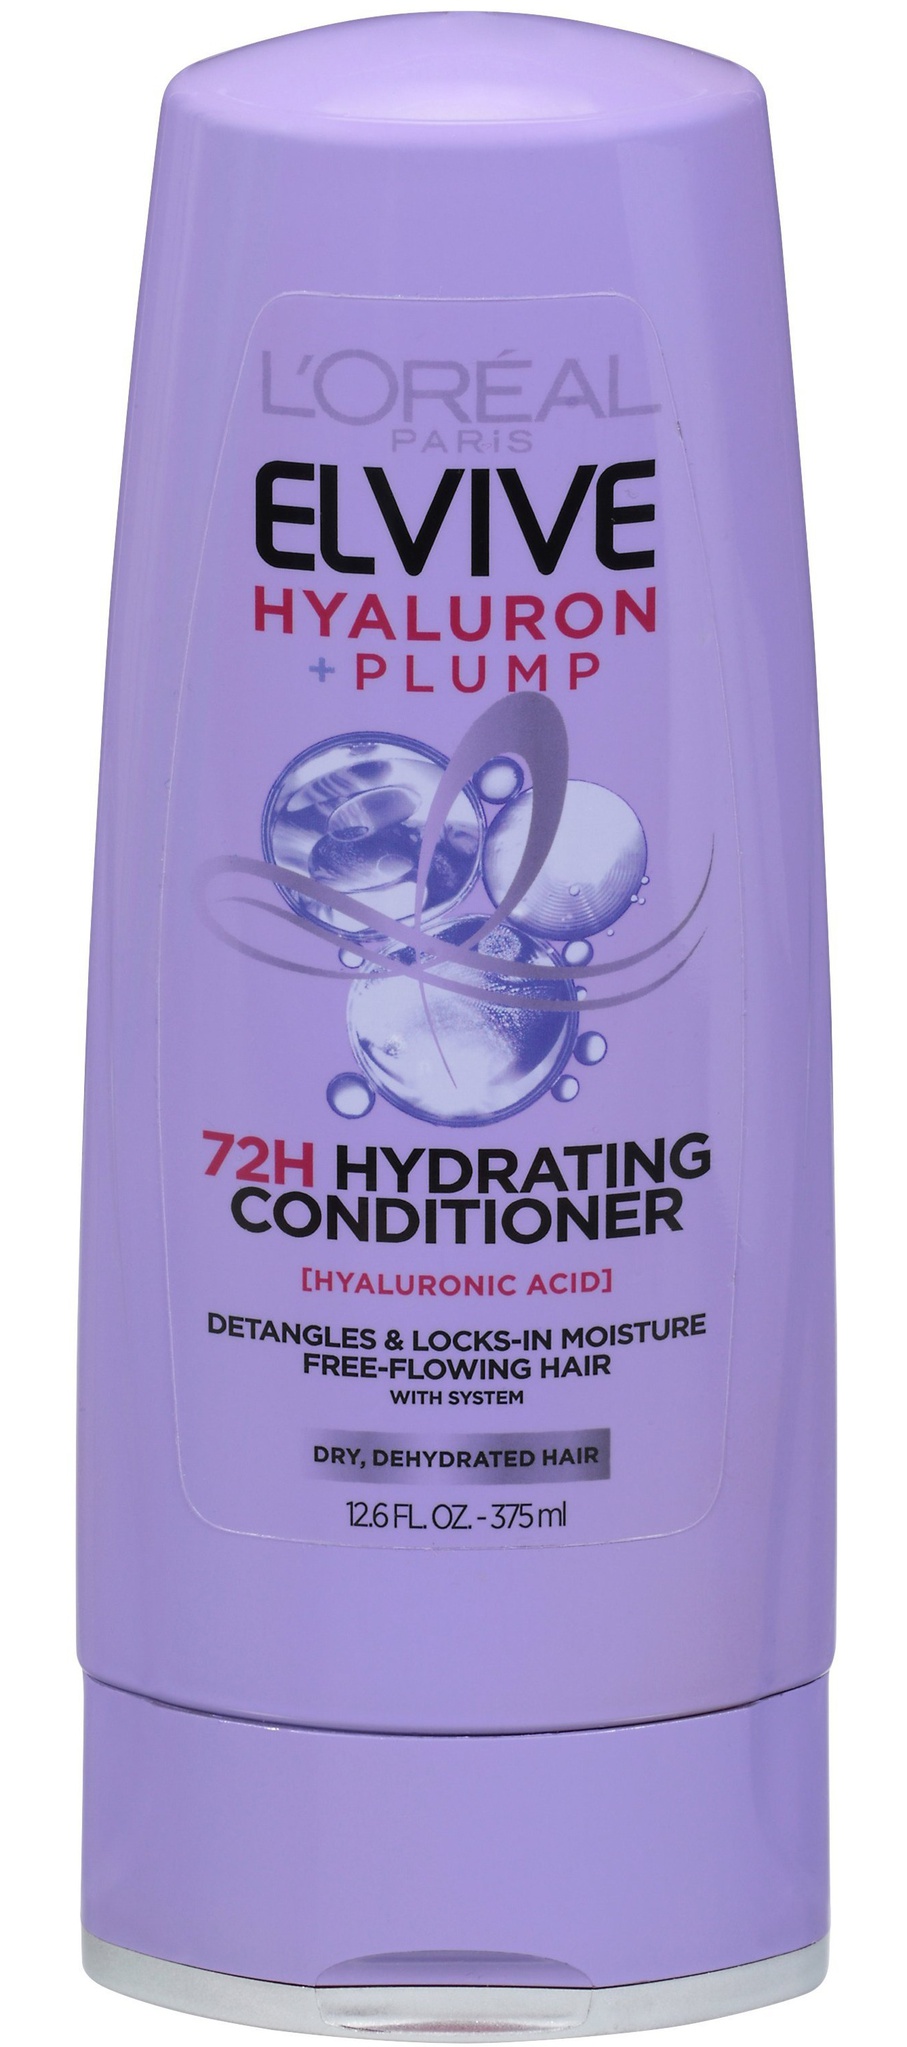 L'Oreal Elvive Hyaluron + Plump Hydrating Conditioner